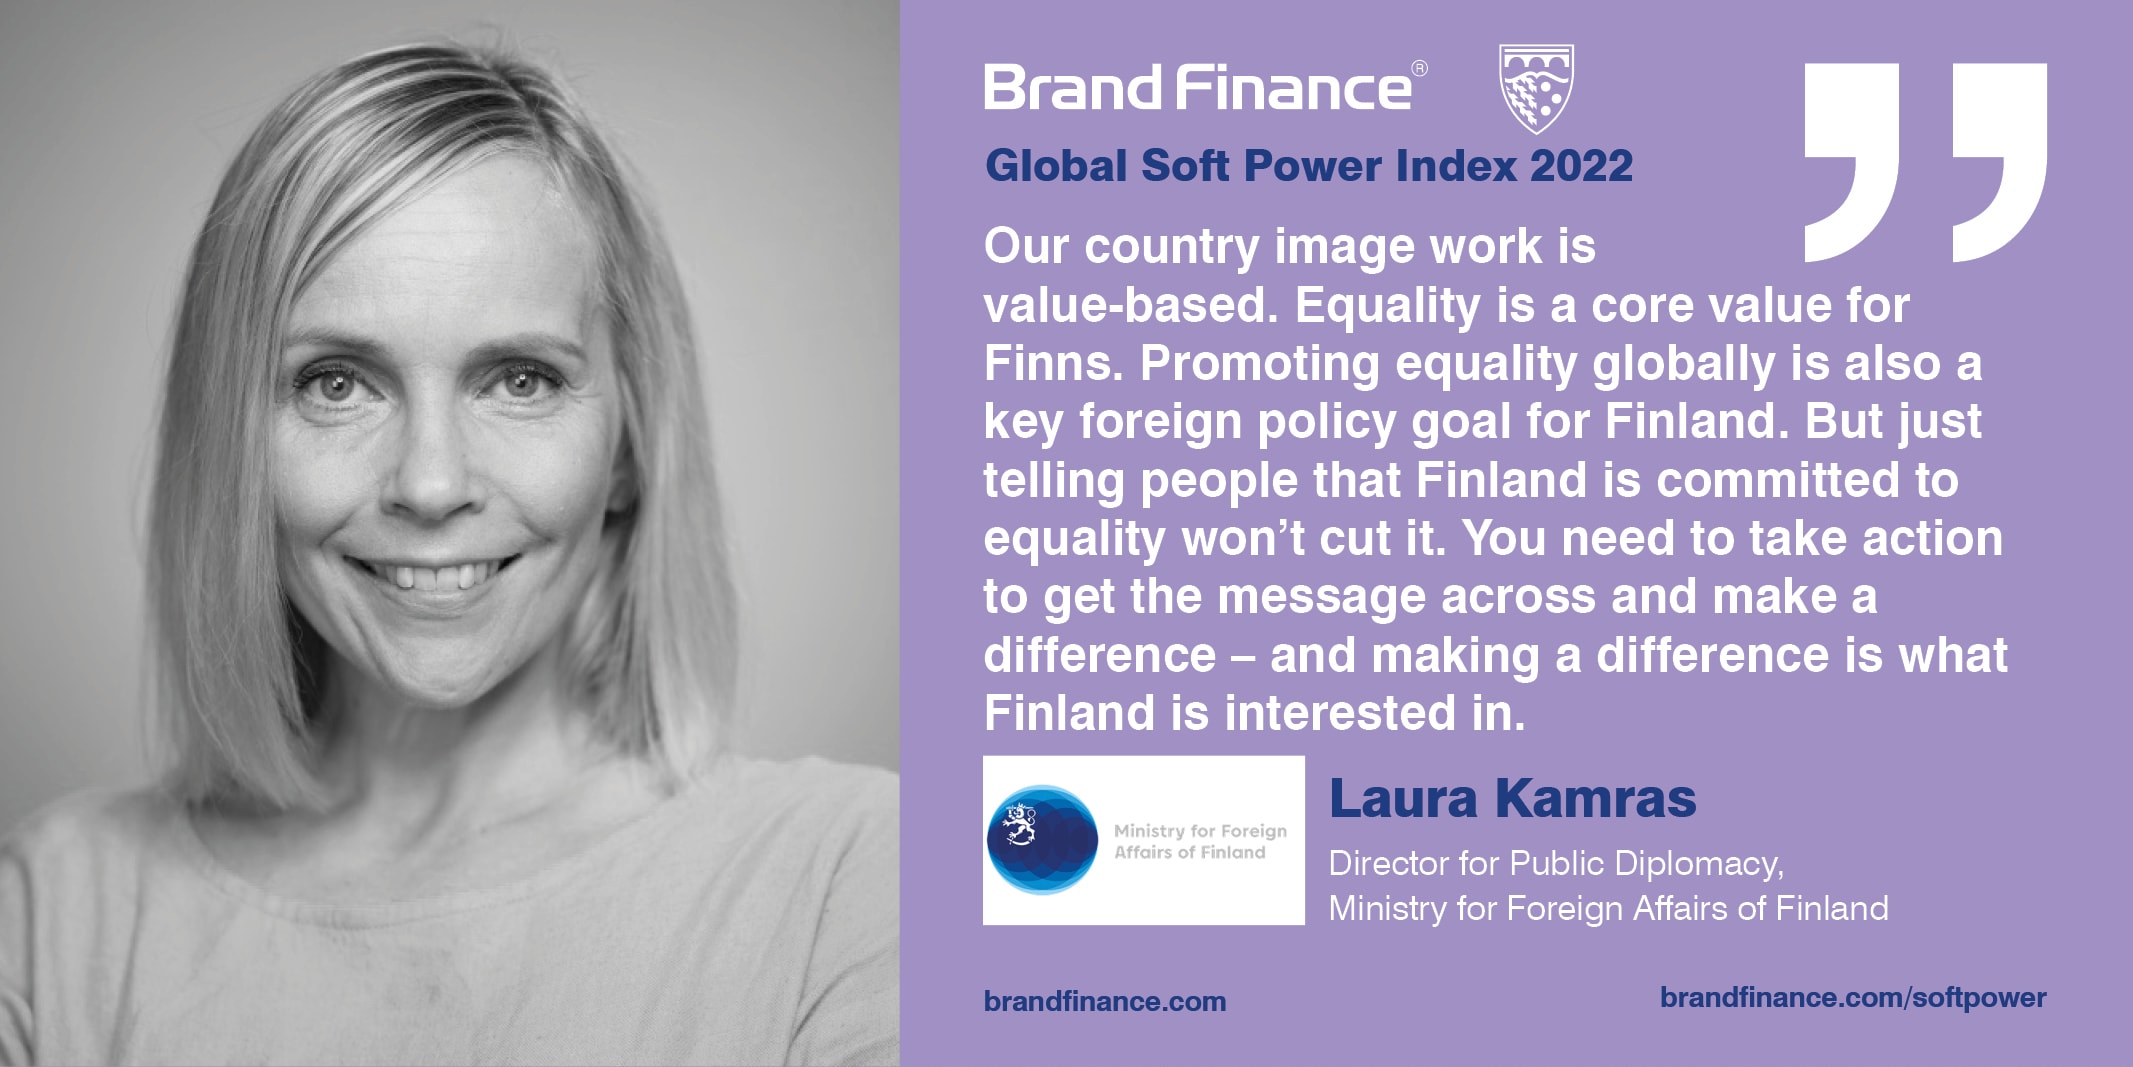 Laura Kamras, Director for Public Diplomacy, Ministry for Foreign Affairs of Finland 